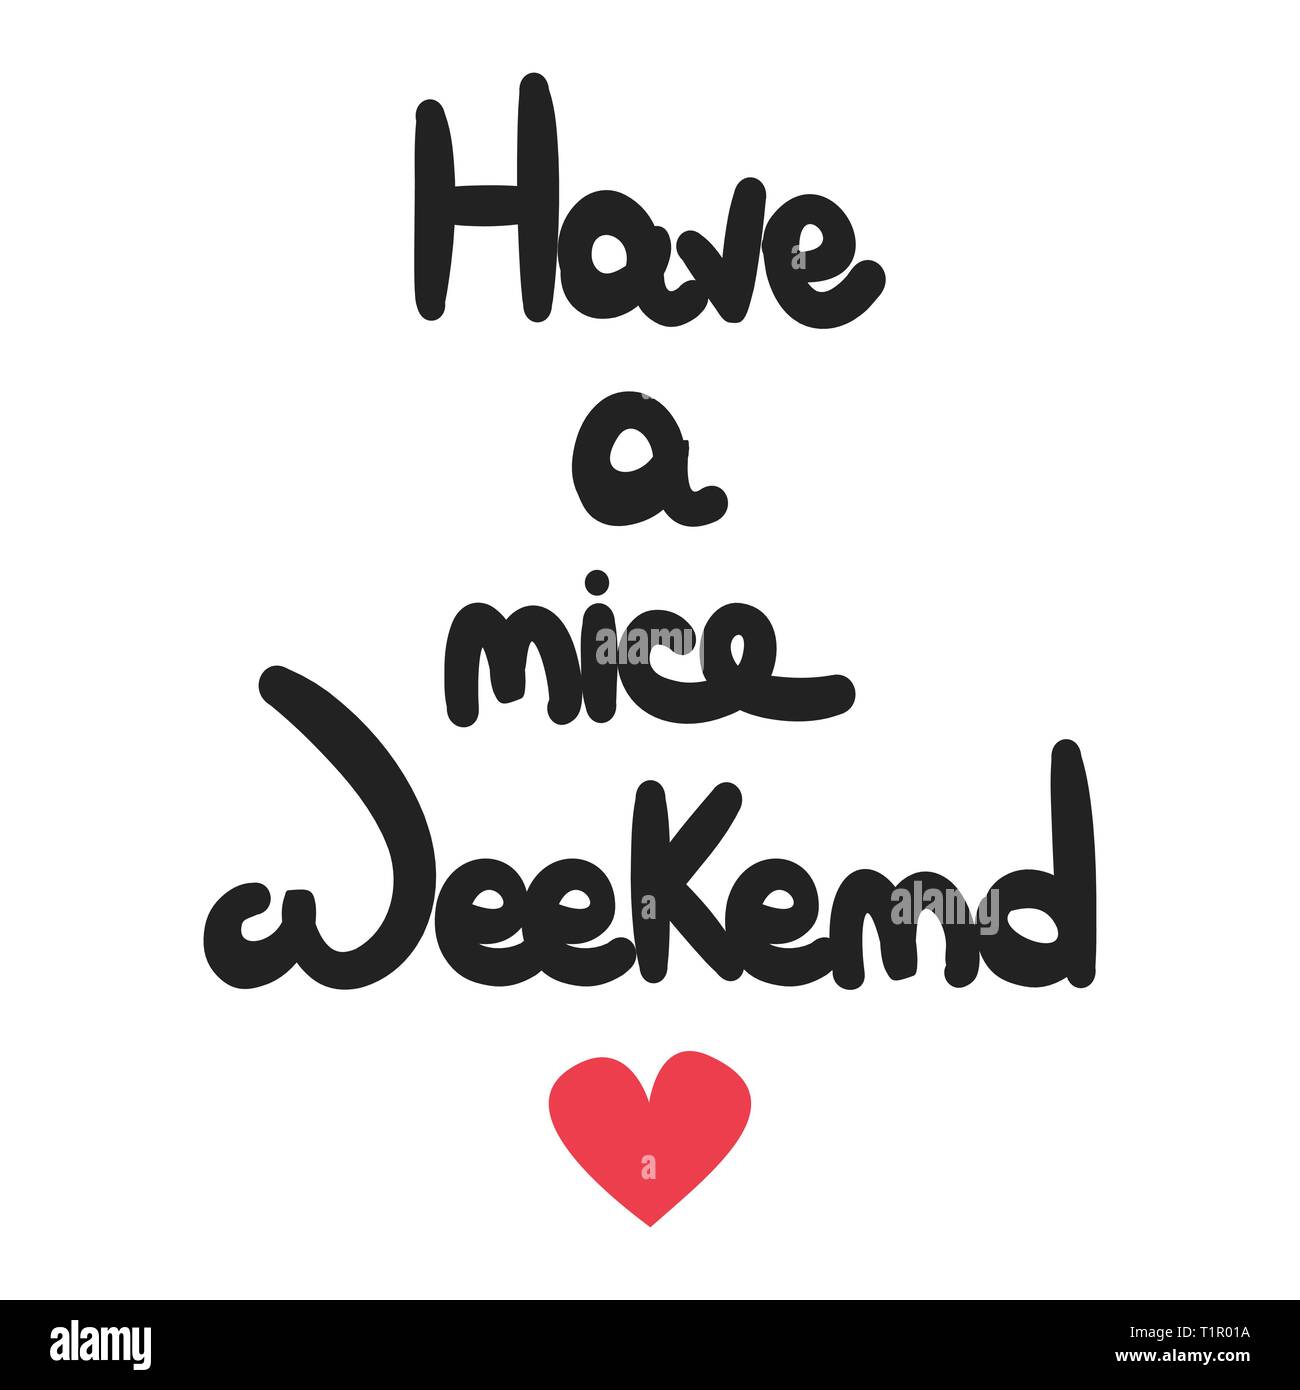 https://c8.alamy.com/comp/T1R01A/cute-hand-drawn-lettering-have-a-nice-weekend-text-vector-card-T1R01A.jpg